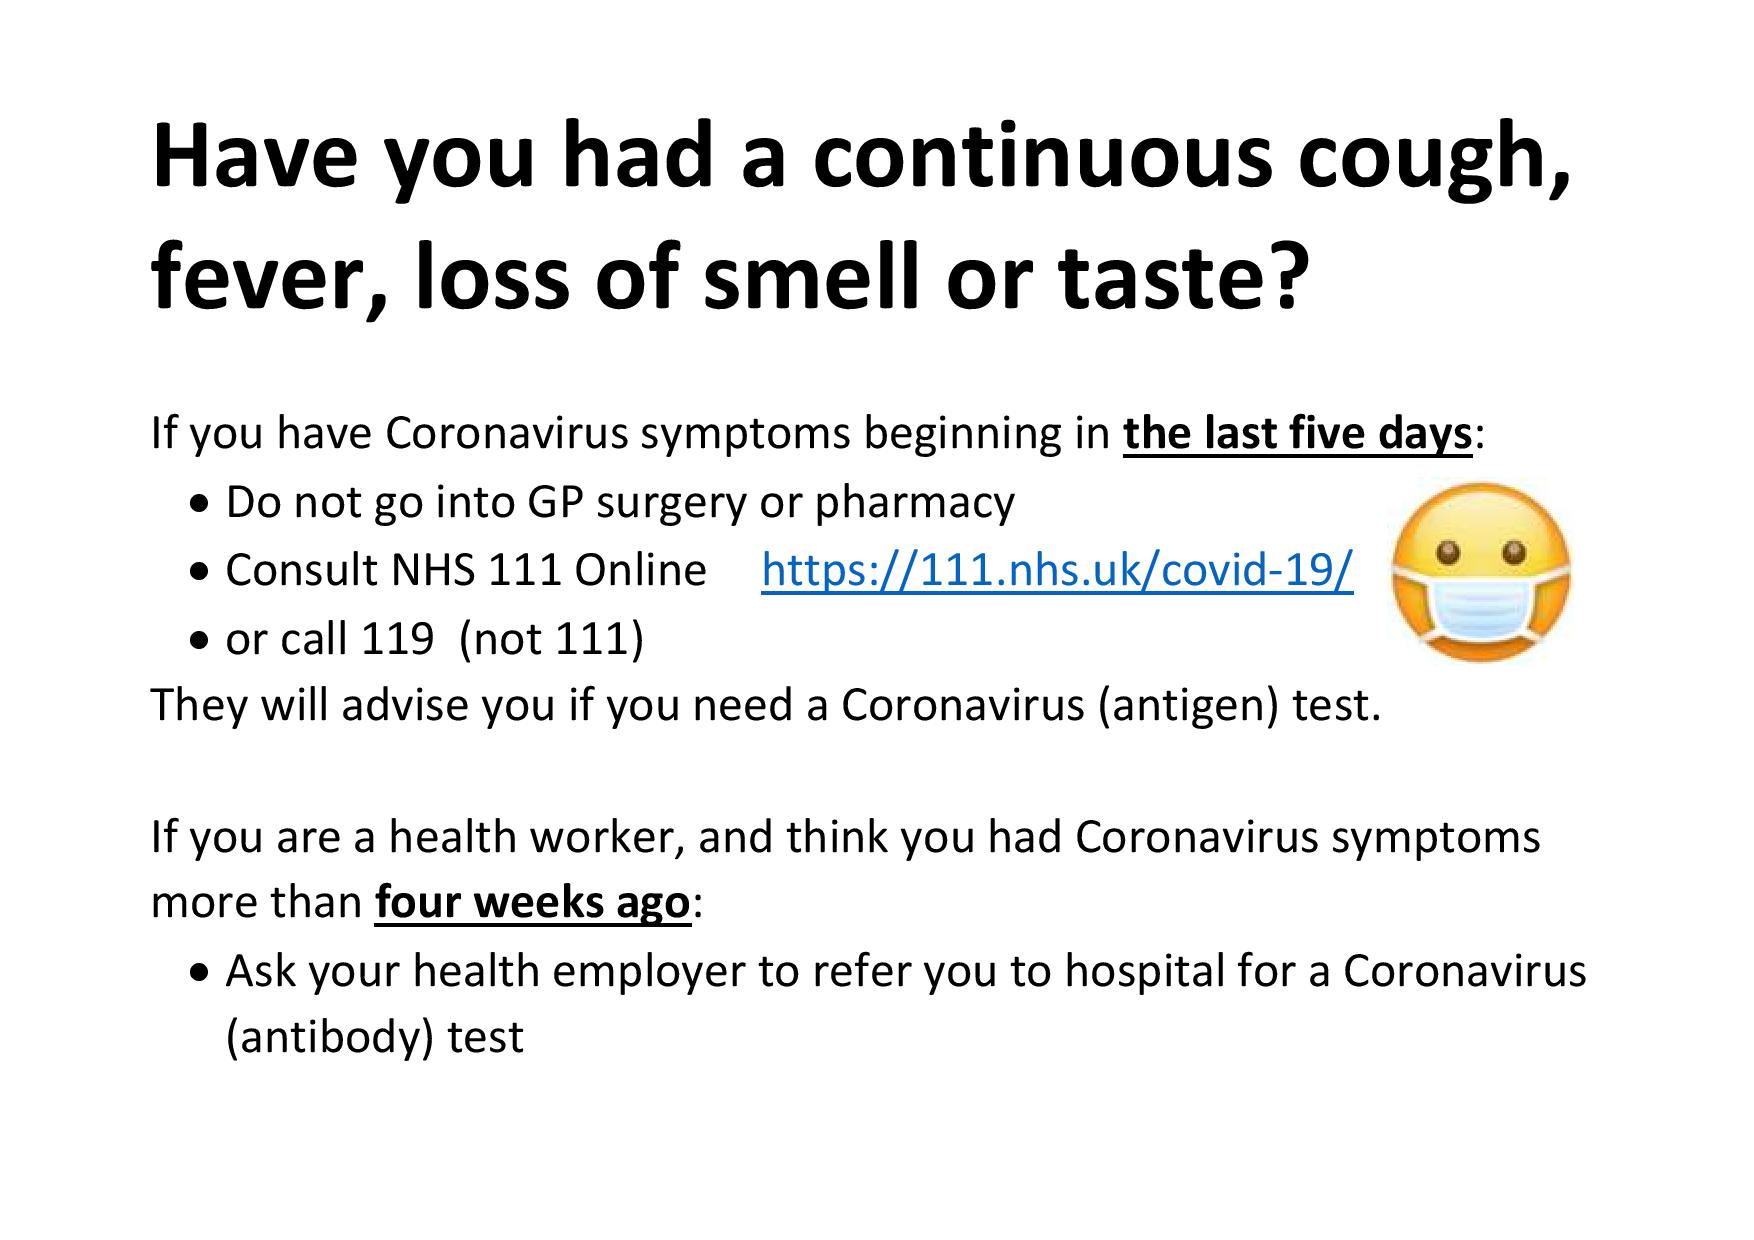 Have you continuous cough